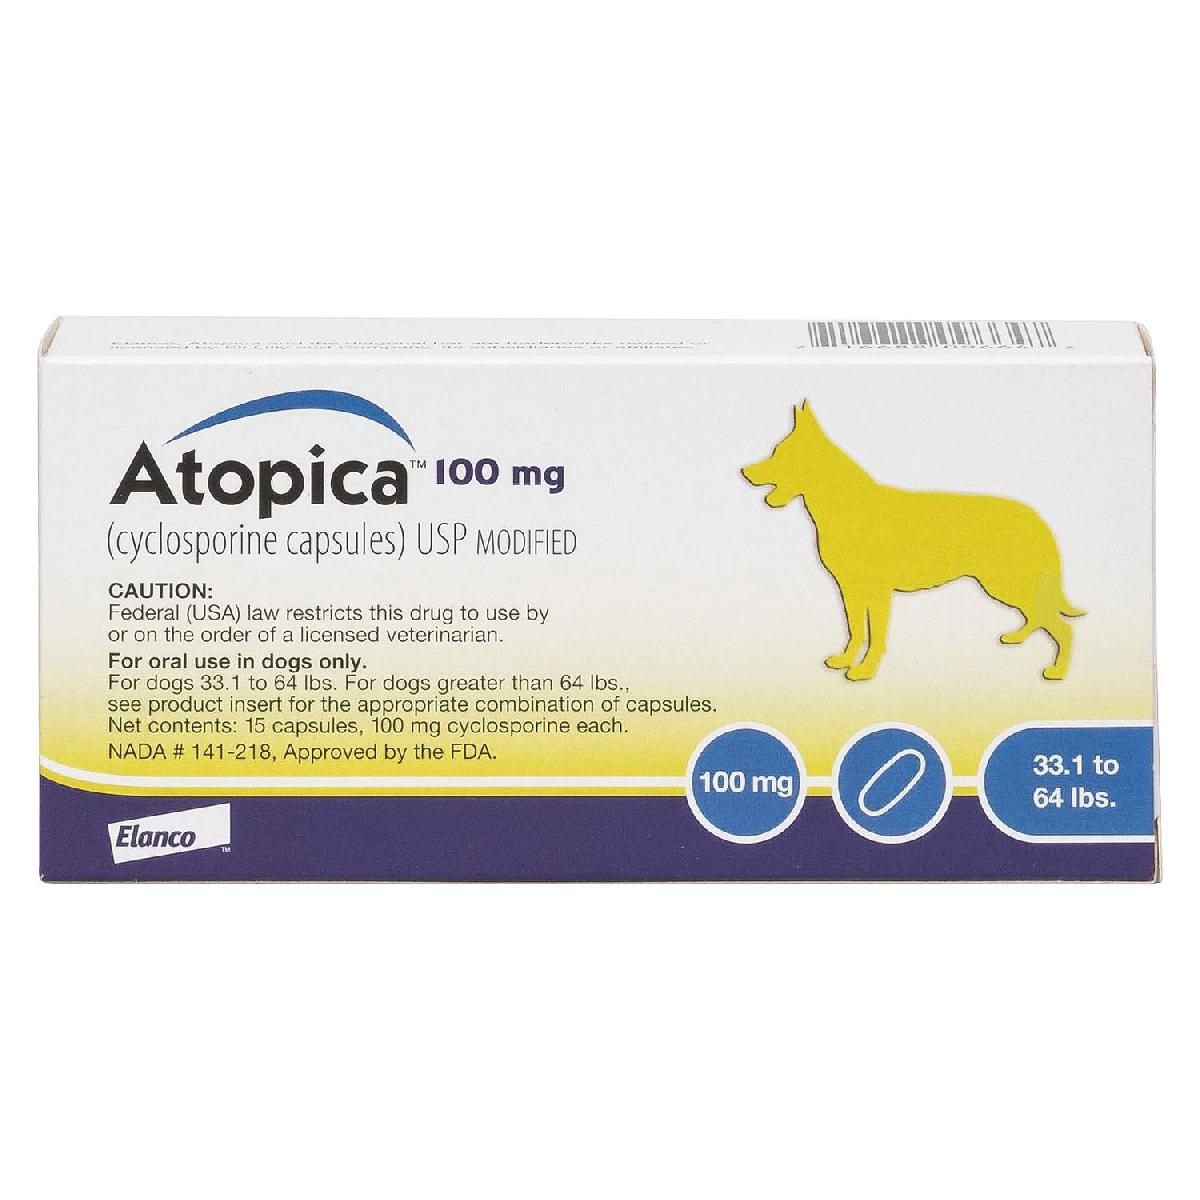 Atopica (cyclosporine capsules) for Dogs 3364 pounds, 100 mg, 15 count